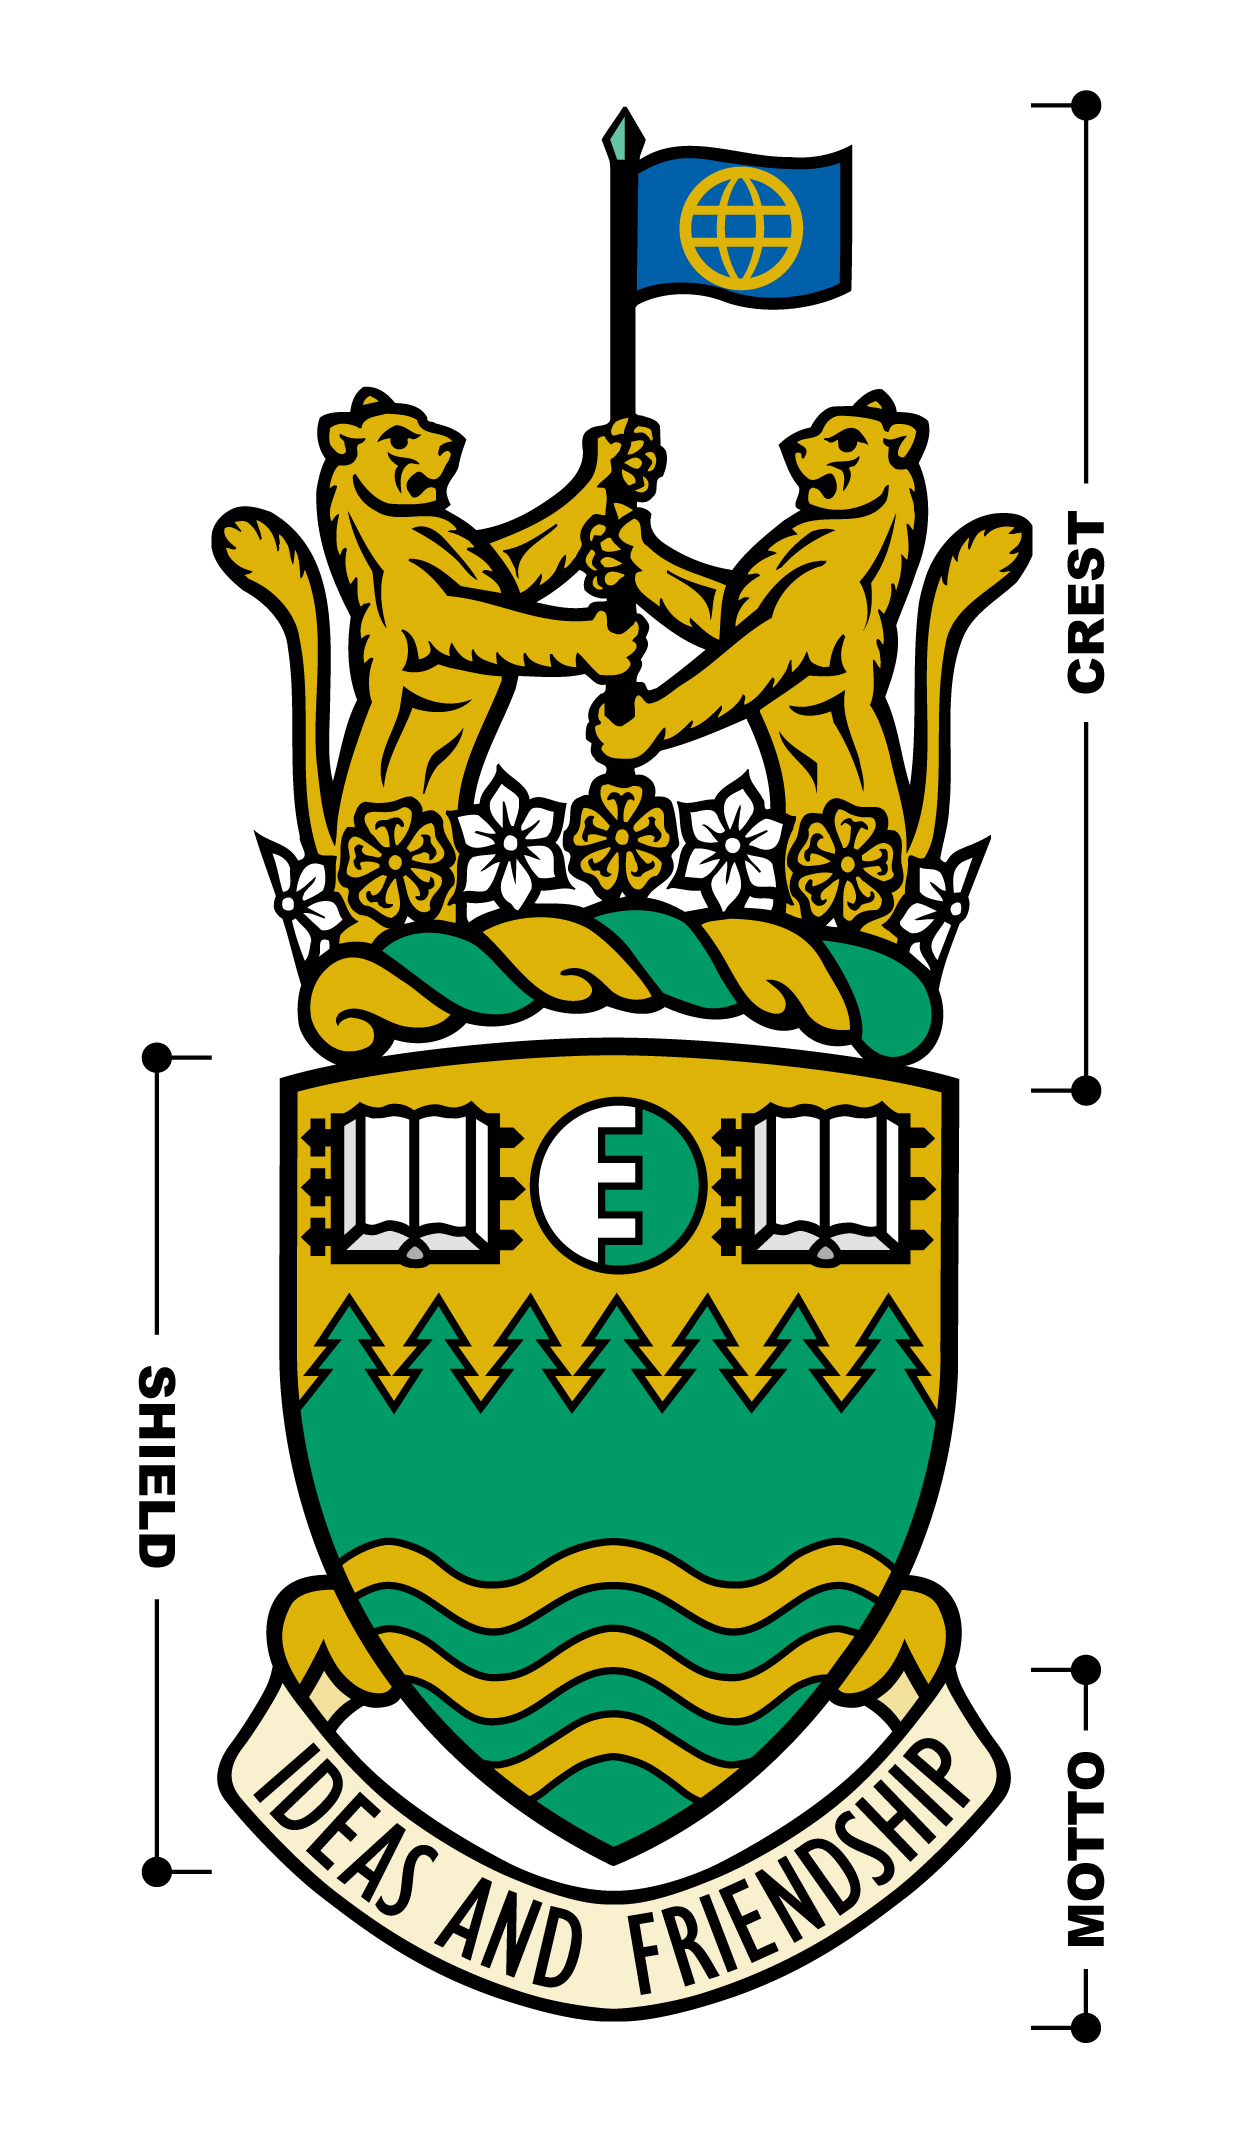 Green College Coat of Arms